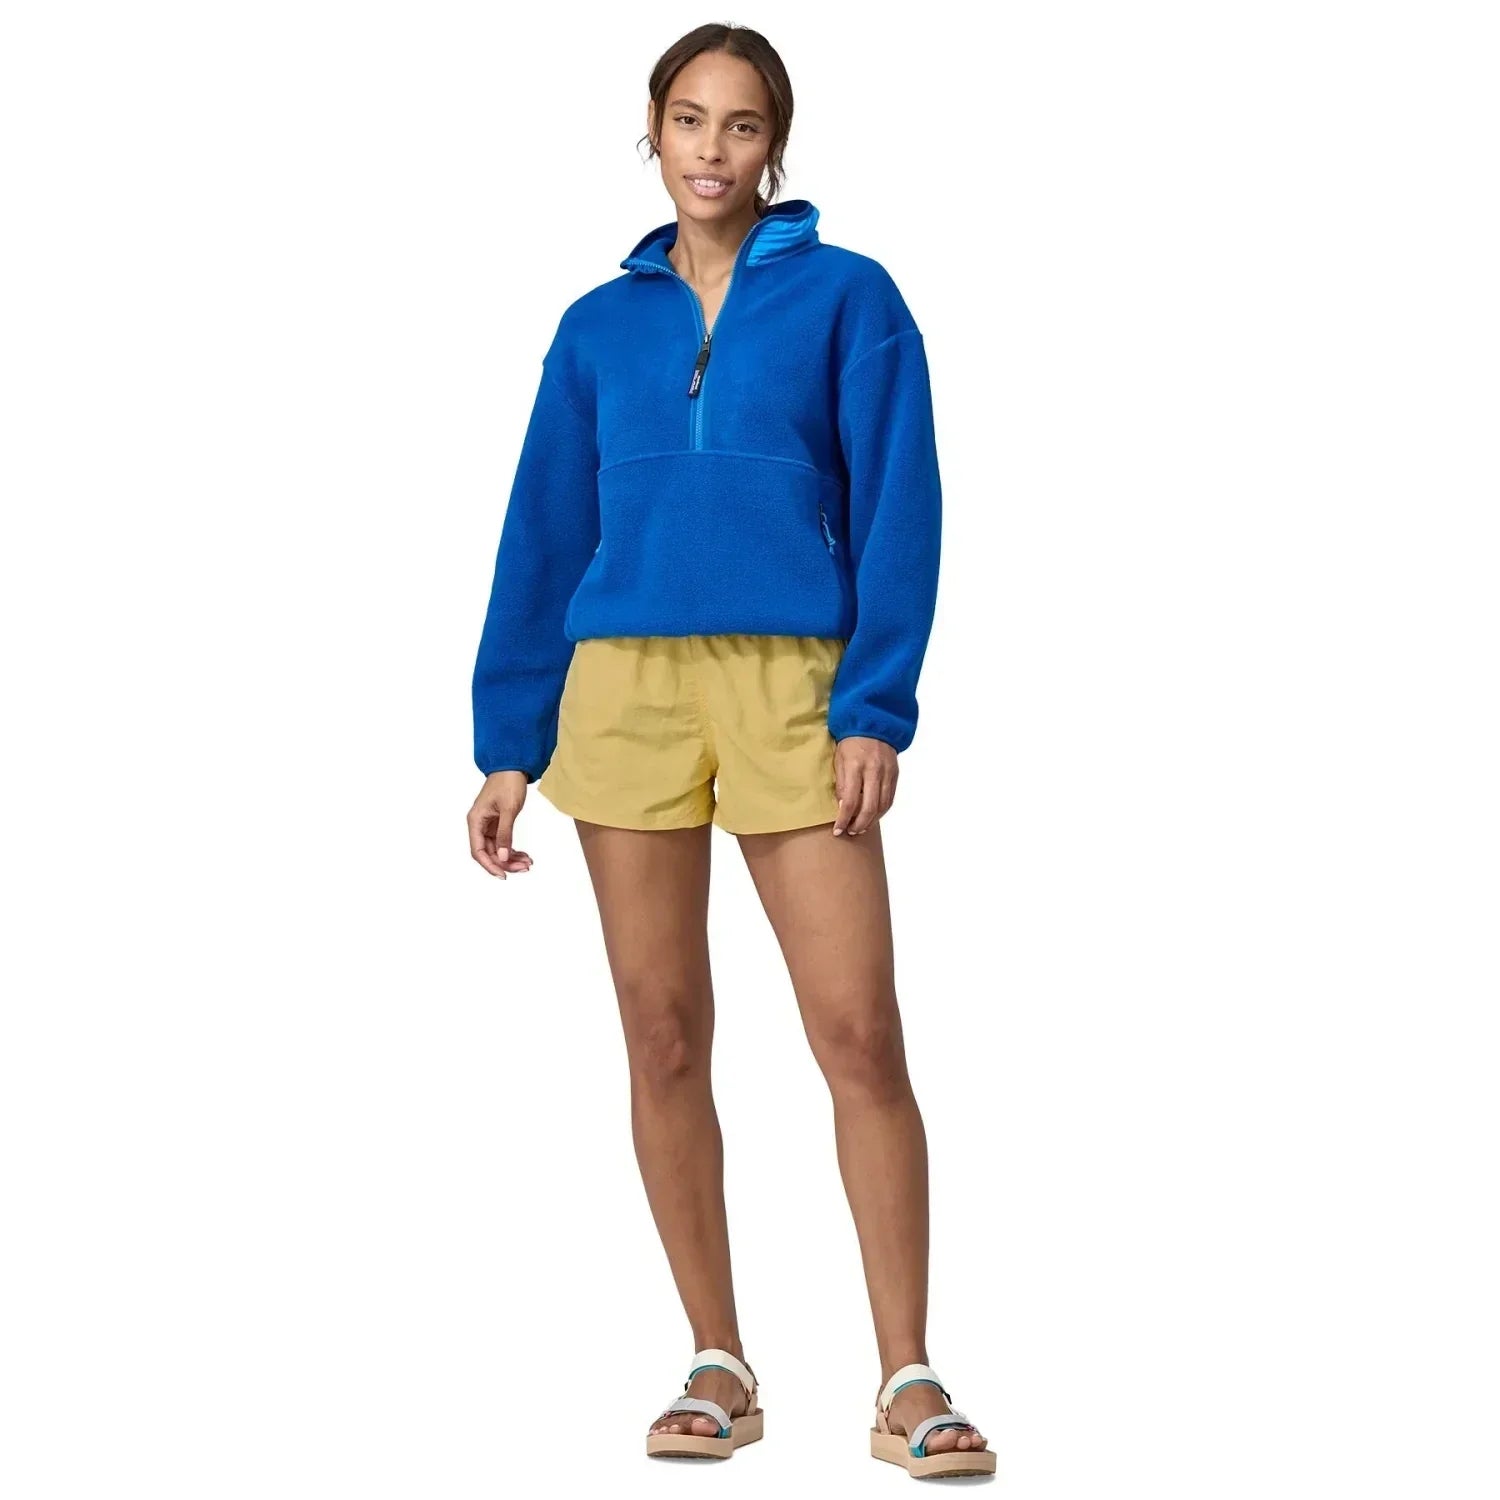 Patagonia 02. WOMENS APPAREL - WOMENS SHORTS - WOMENS SHORTS ACTIVE Women's Barely Baggies Shorts - 2 1/2 in MILY MILLED YELLOW